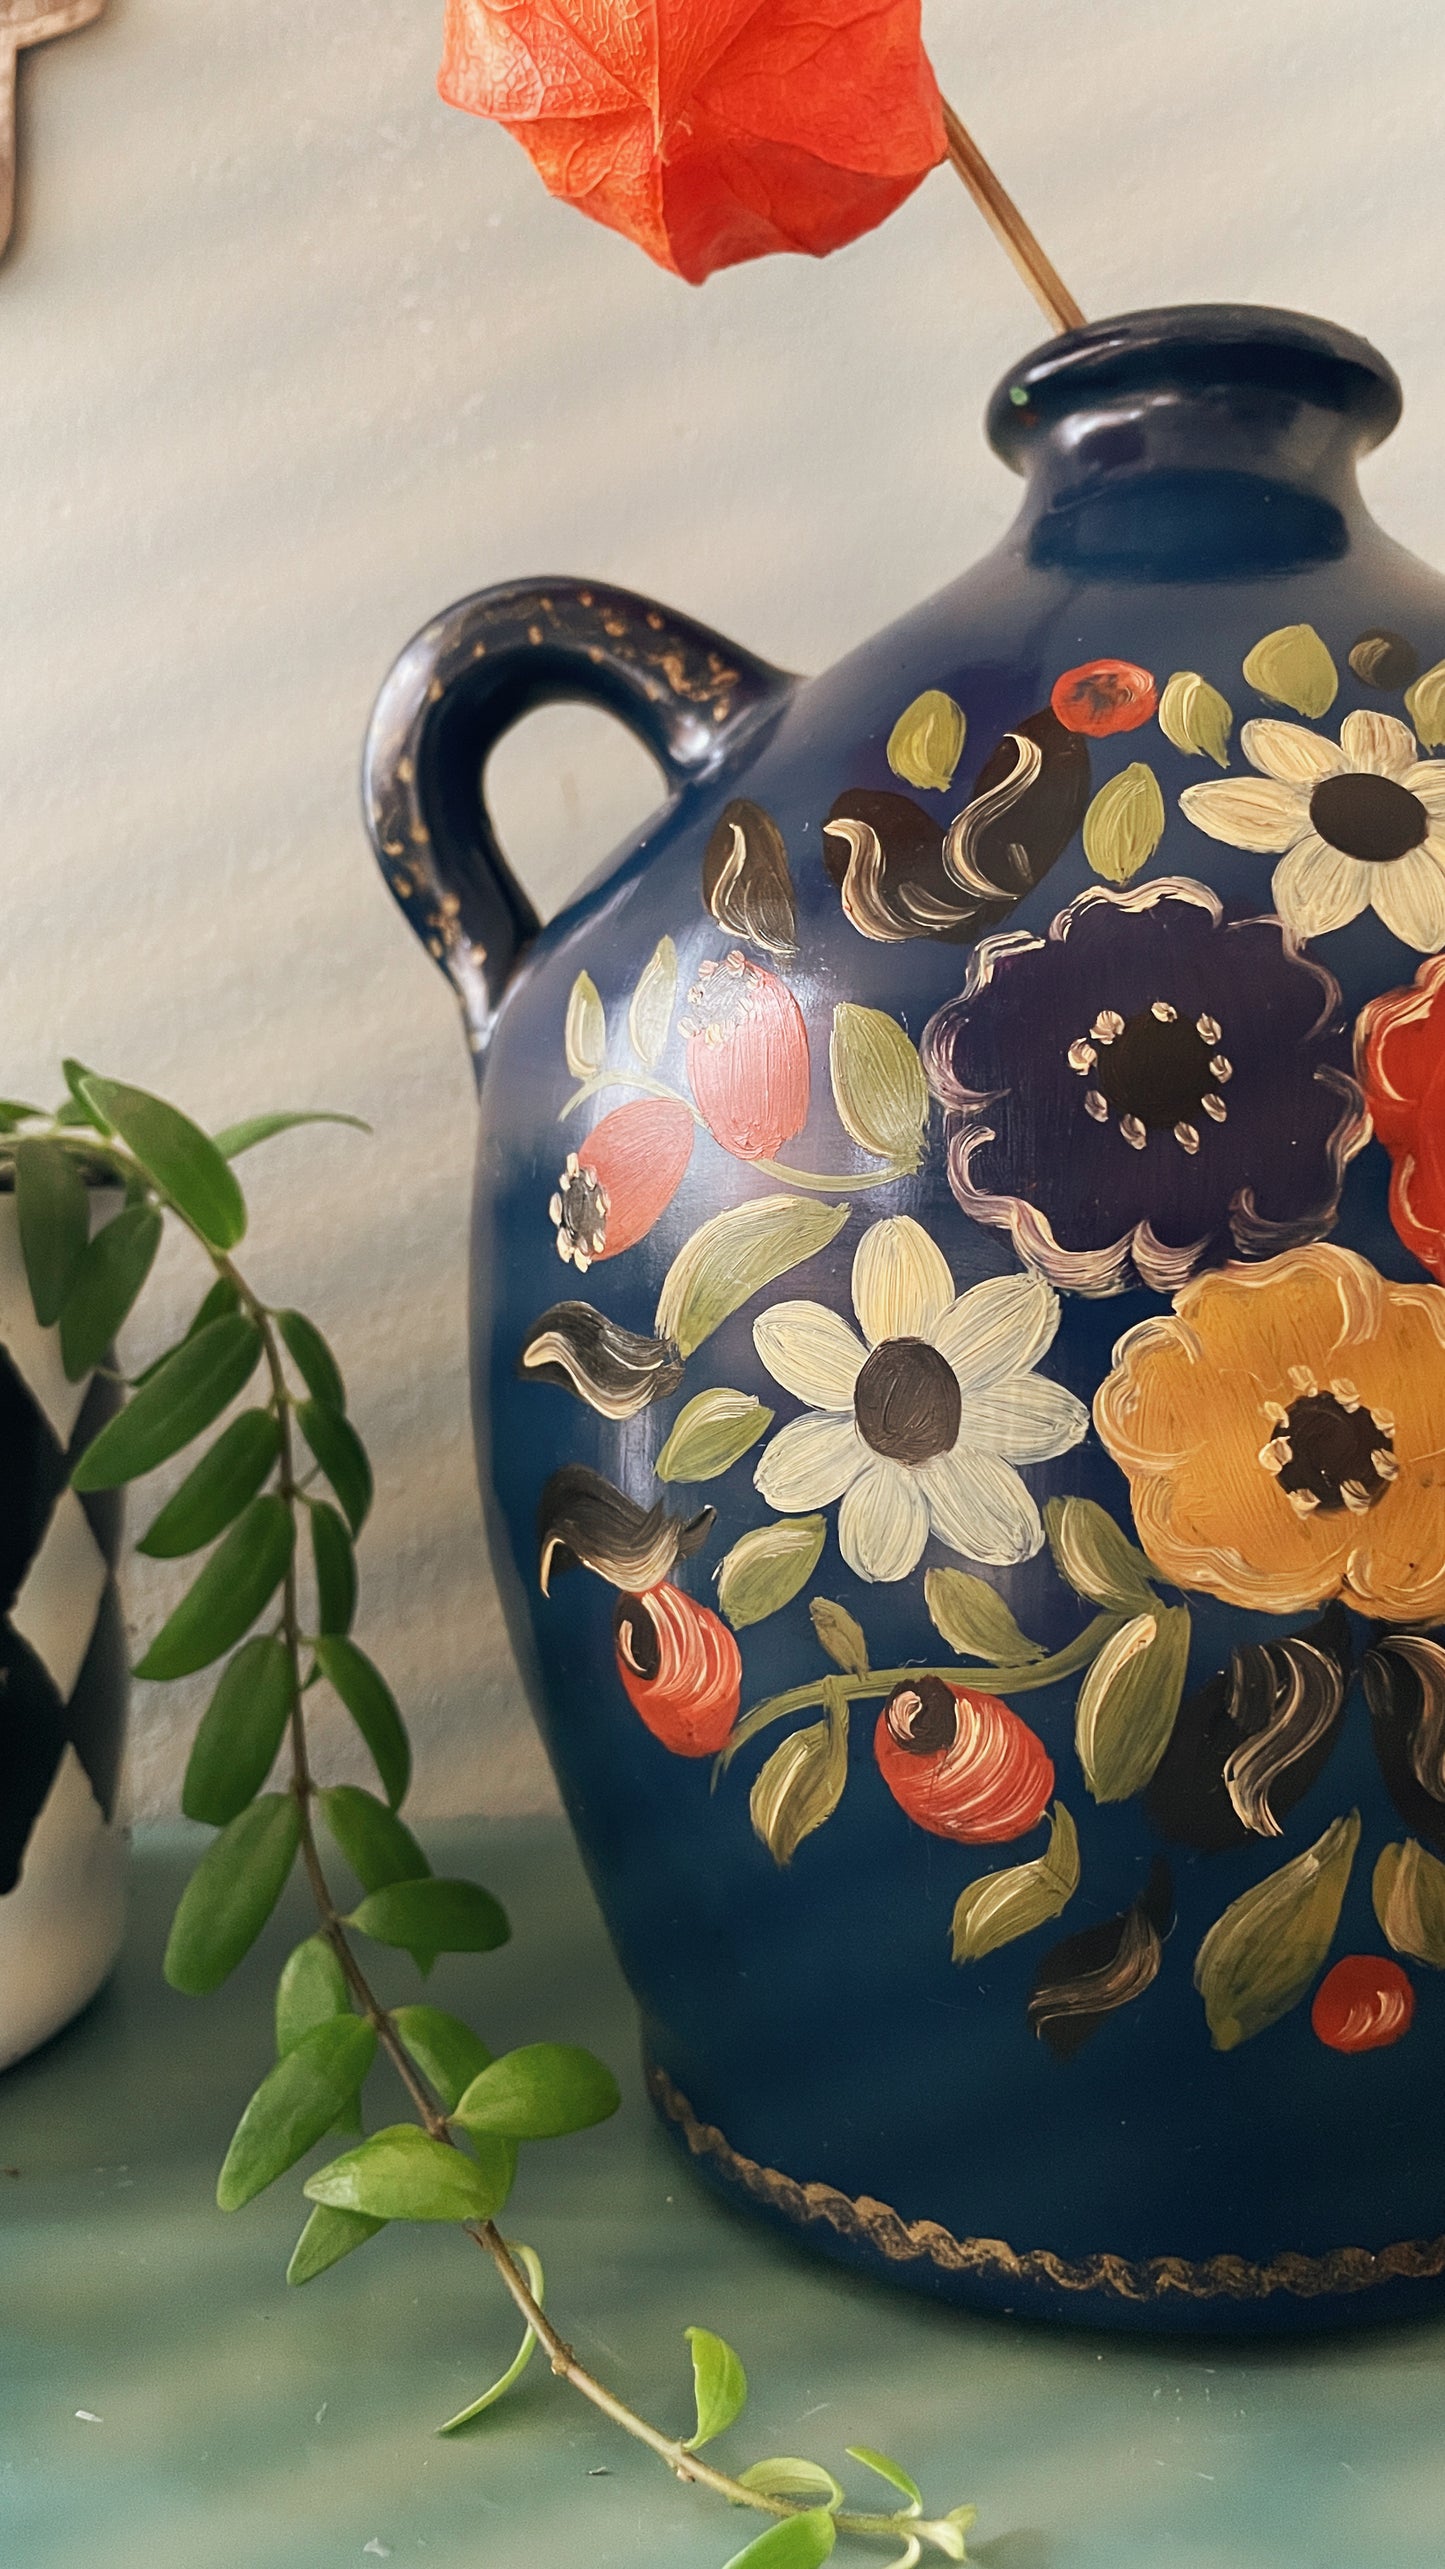 Hand painted pitcher